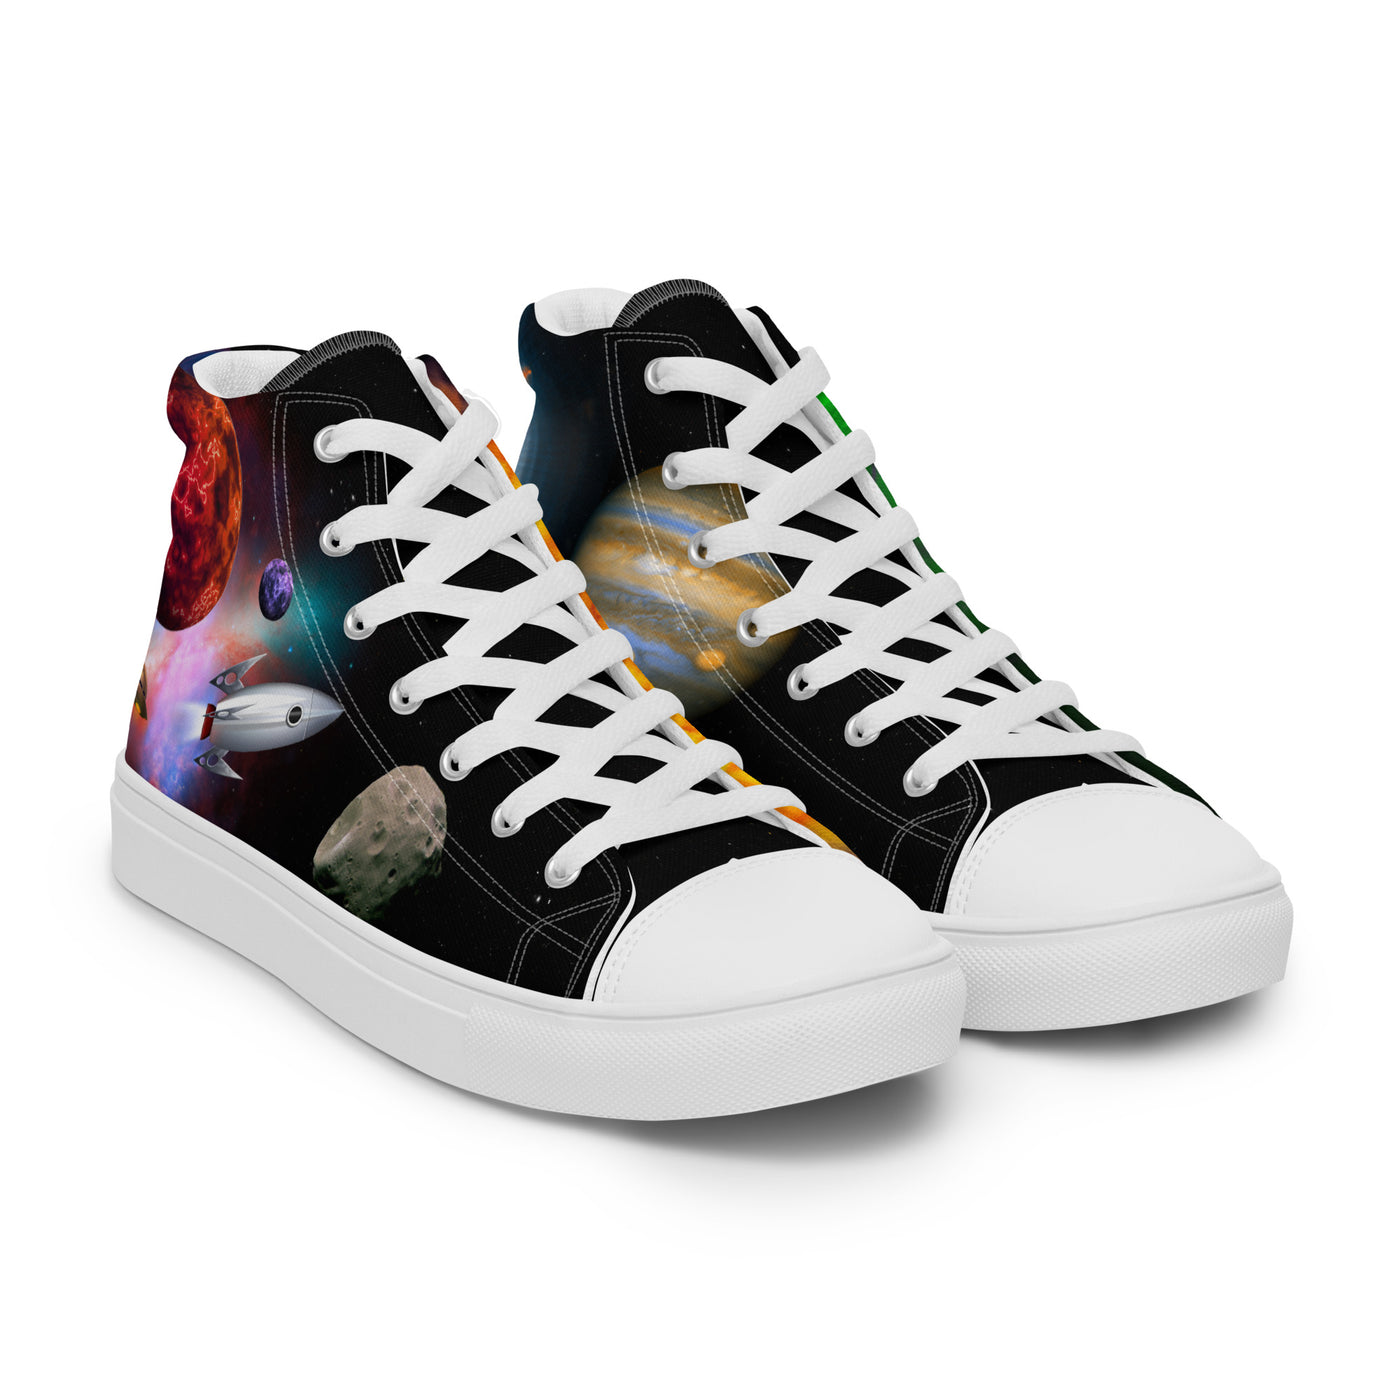 Space Fantasy - Women's High Top Canvas Shoes